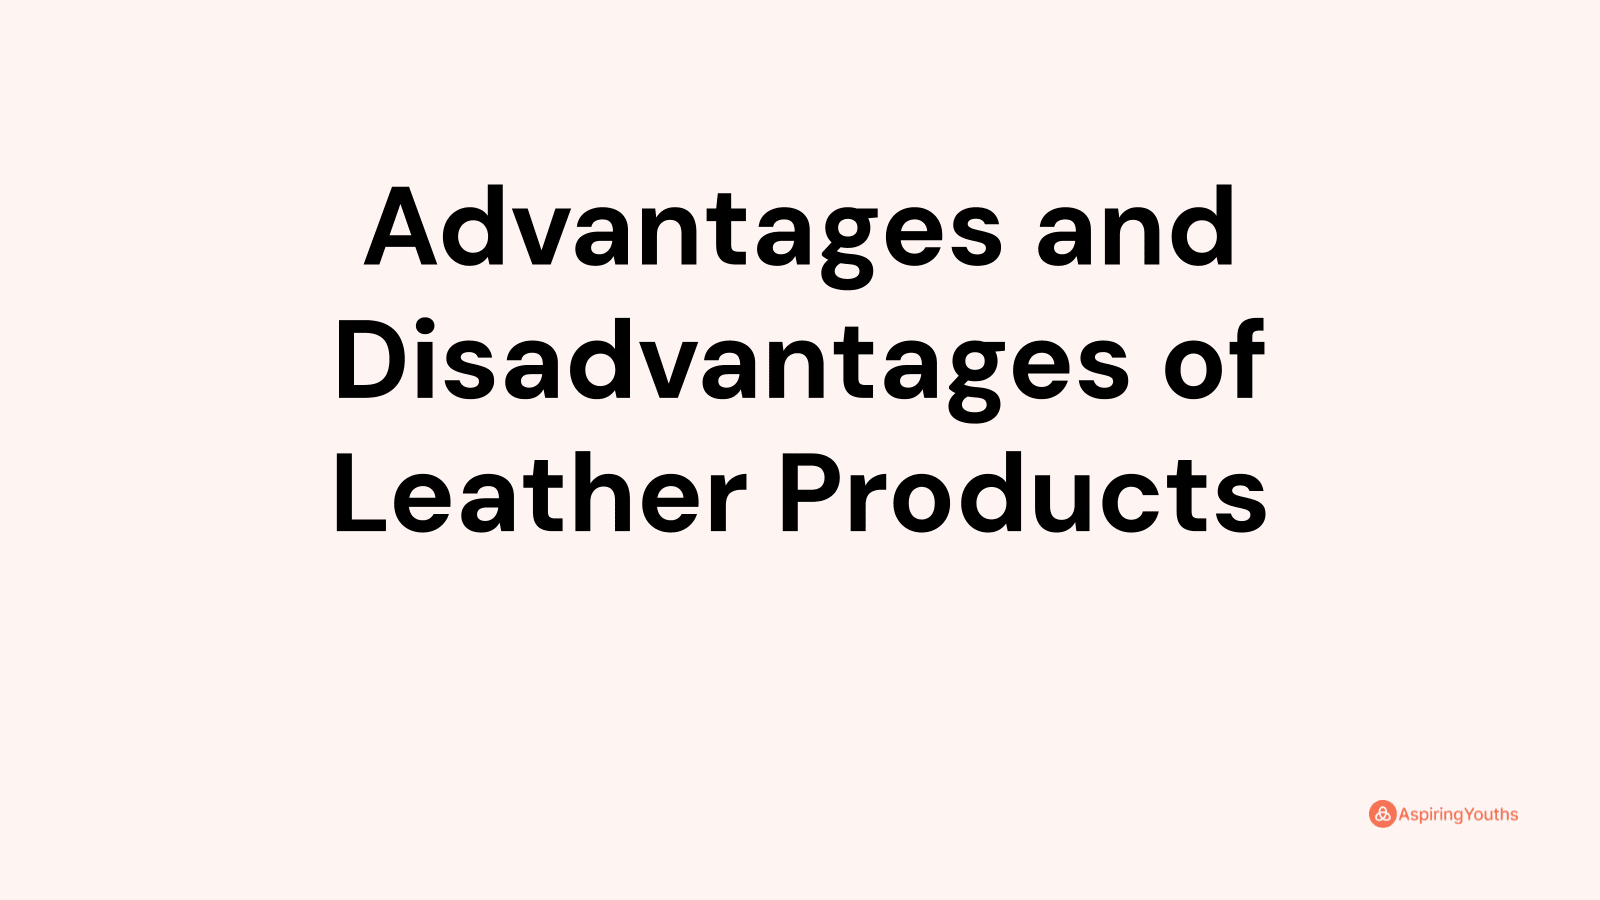 Advantages and disadvantages of Leather Products